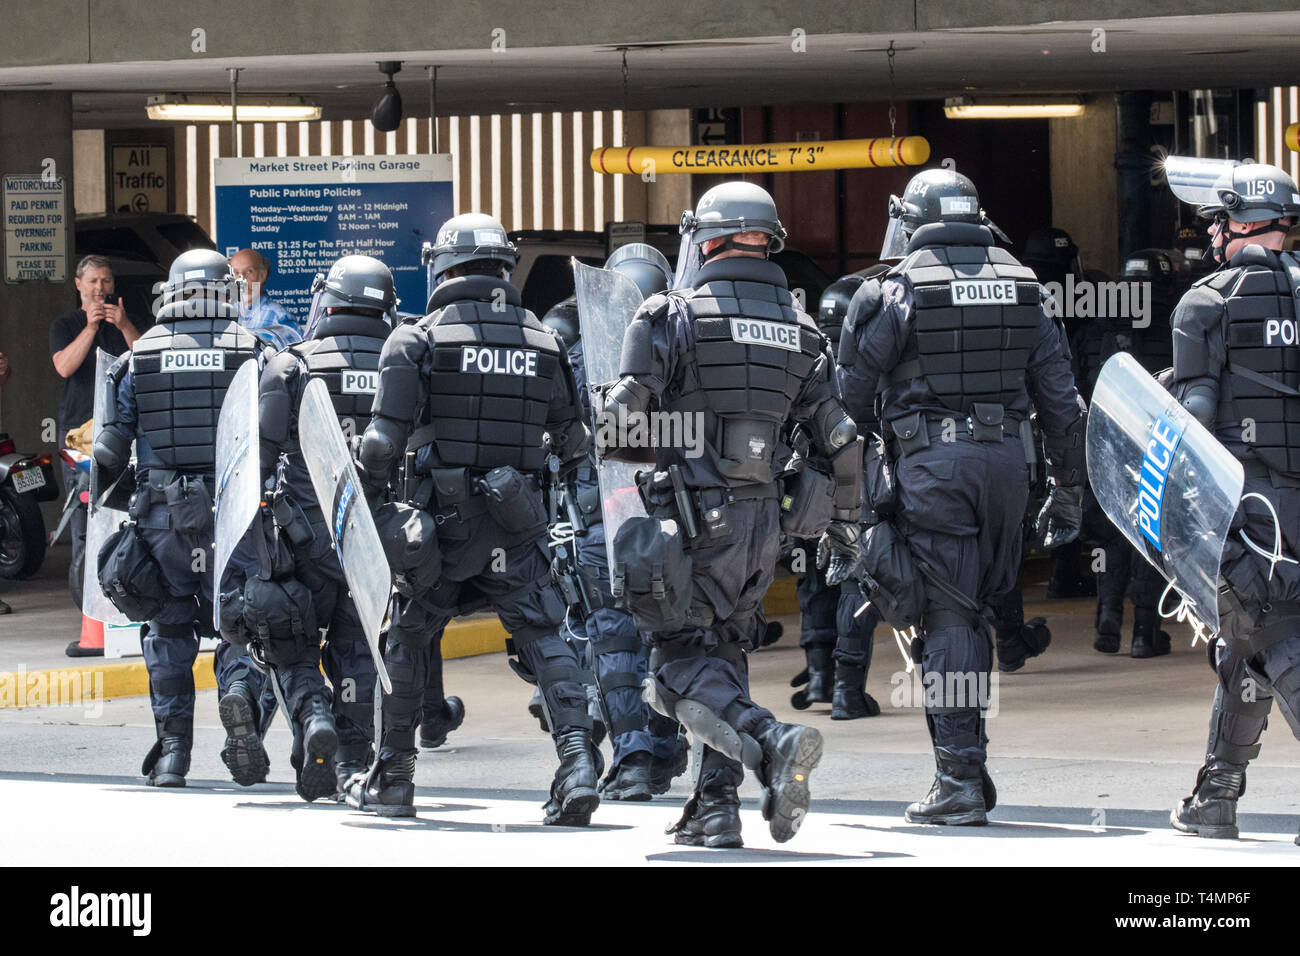 Police in Riot Gear March into Urban Street Garage to Secure Violence Stock Photo